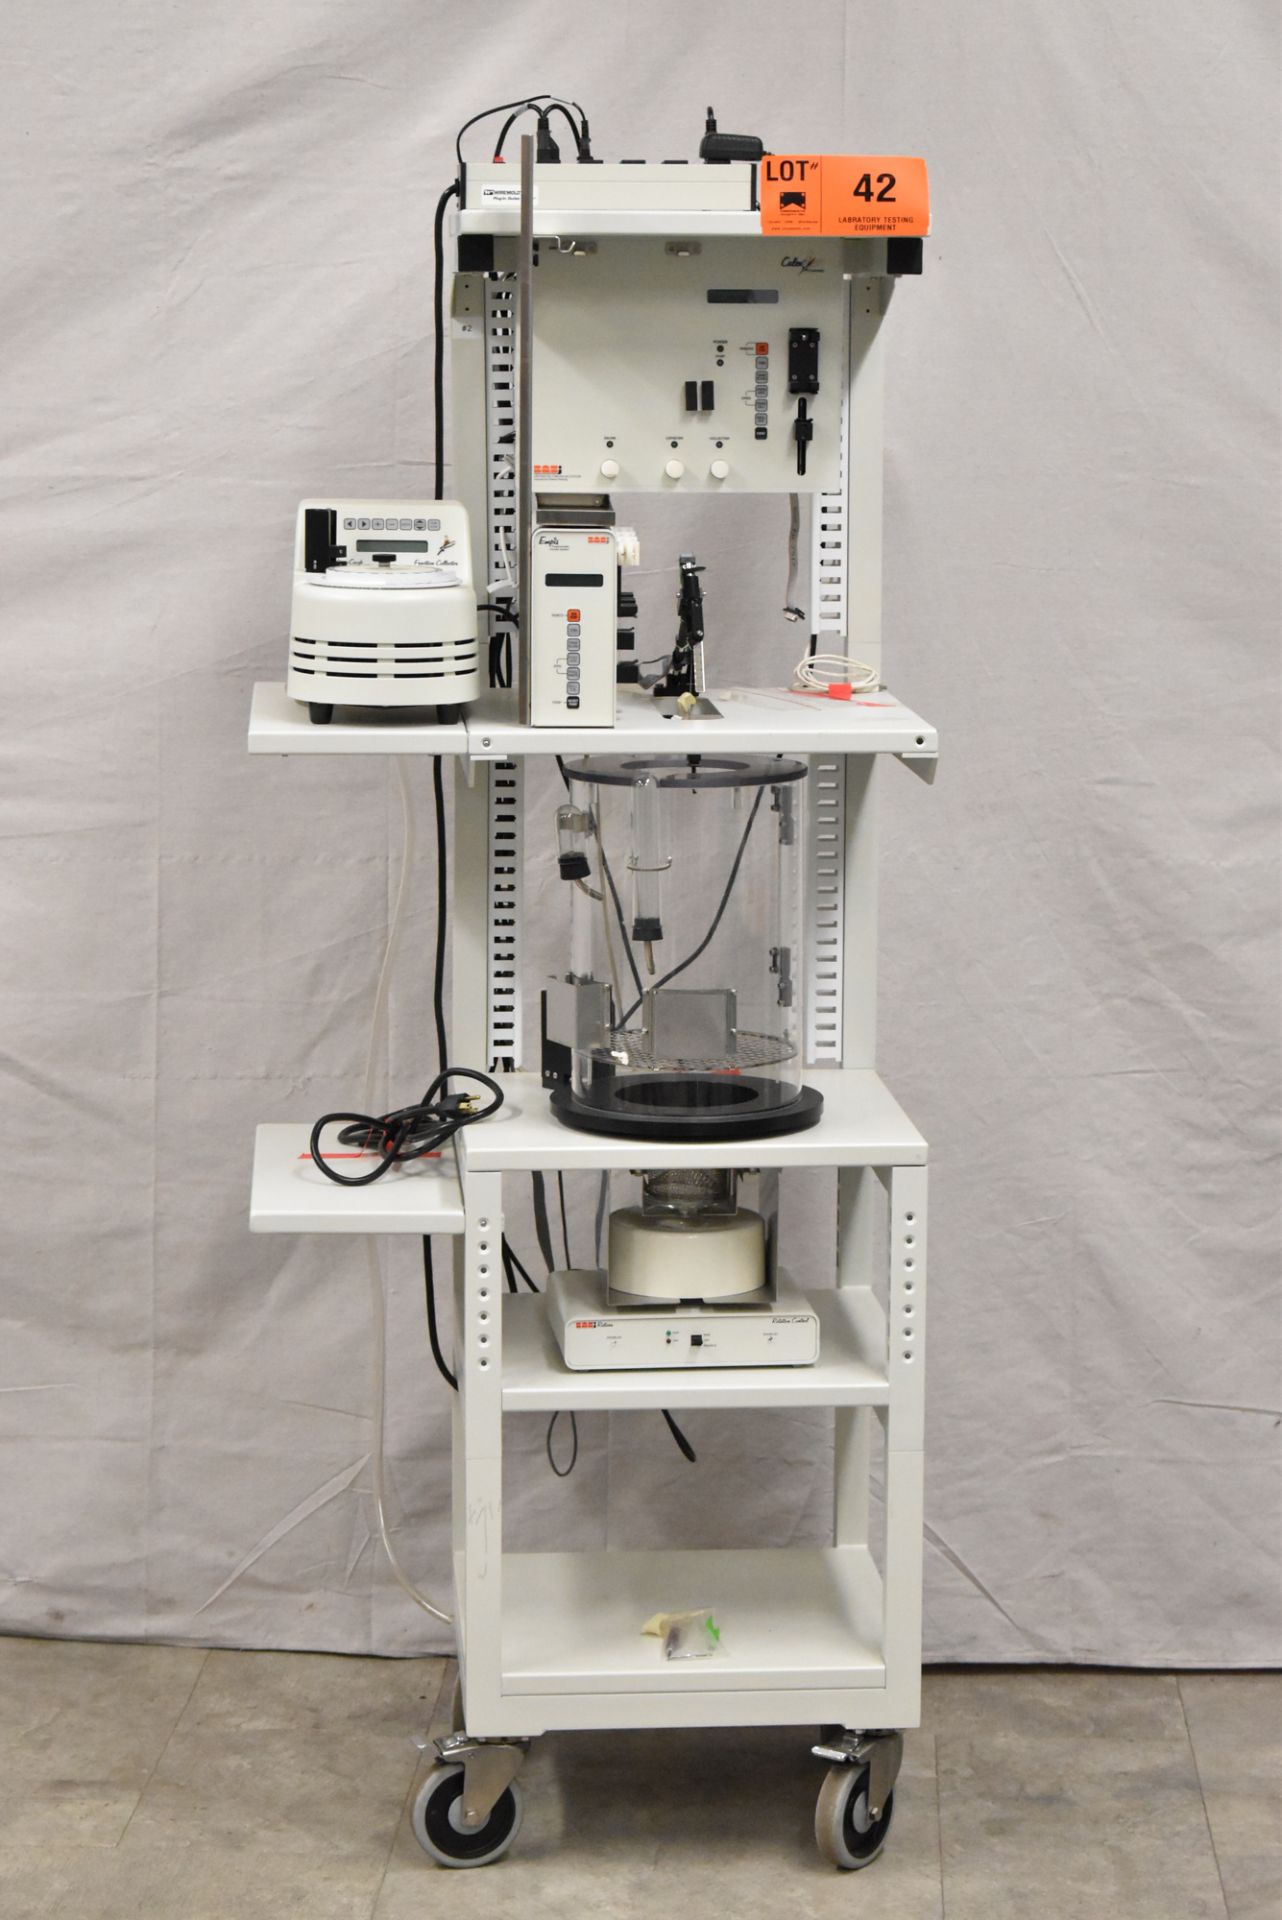 CULEX MICRO-DIALYSIS SYSTEM CONSISTING OF CULEX EMPIS PROGRAMMABLE INFUSION SYSTEM, CULEX HONEY COMB